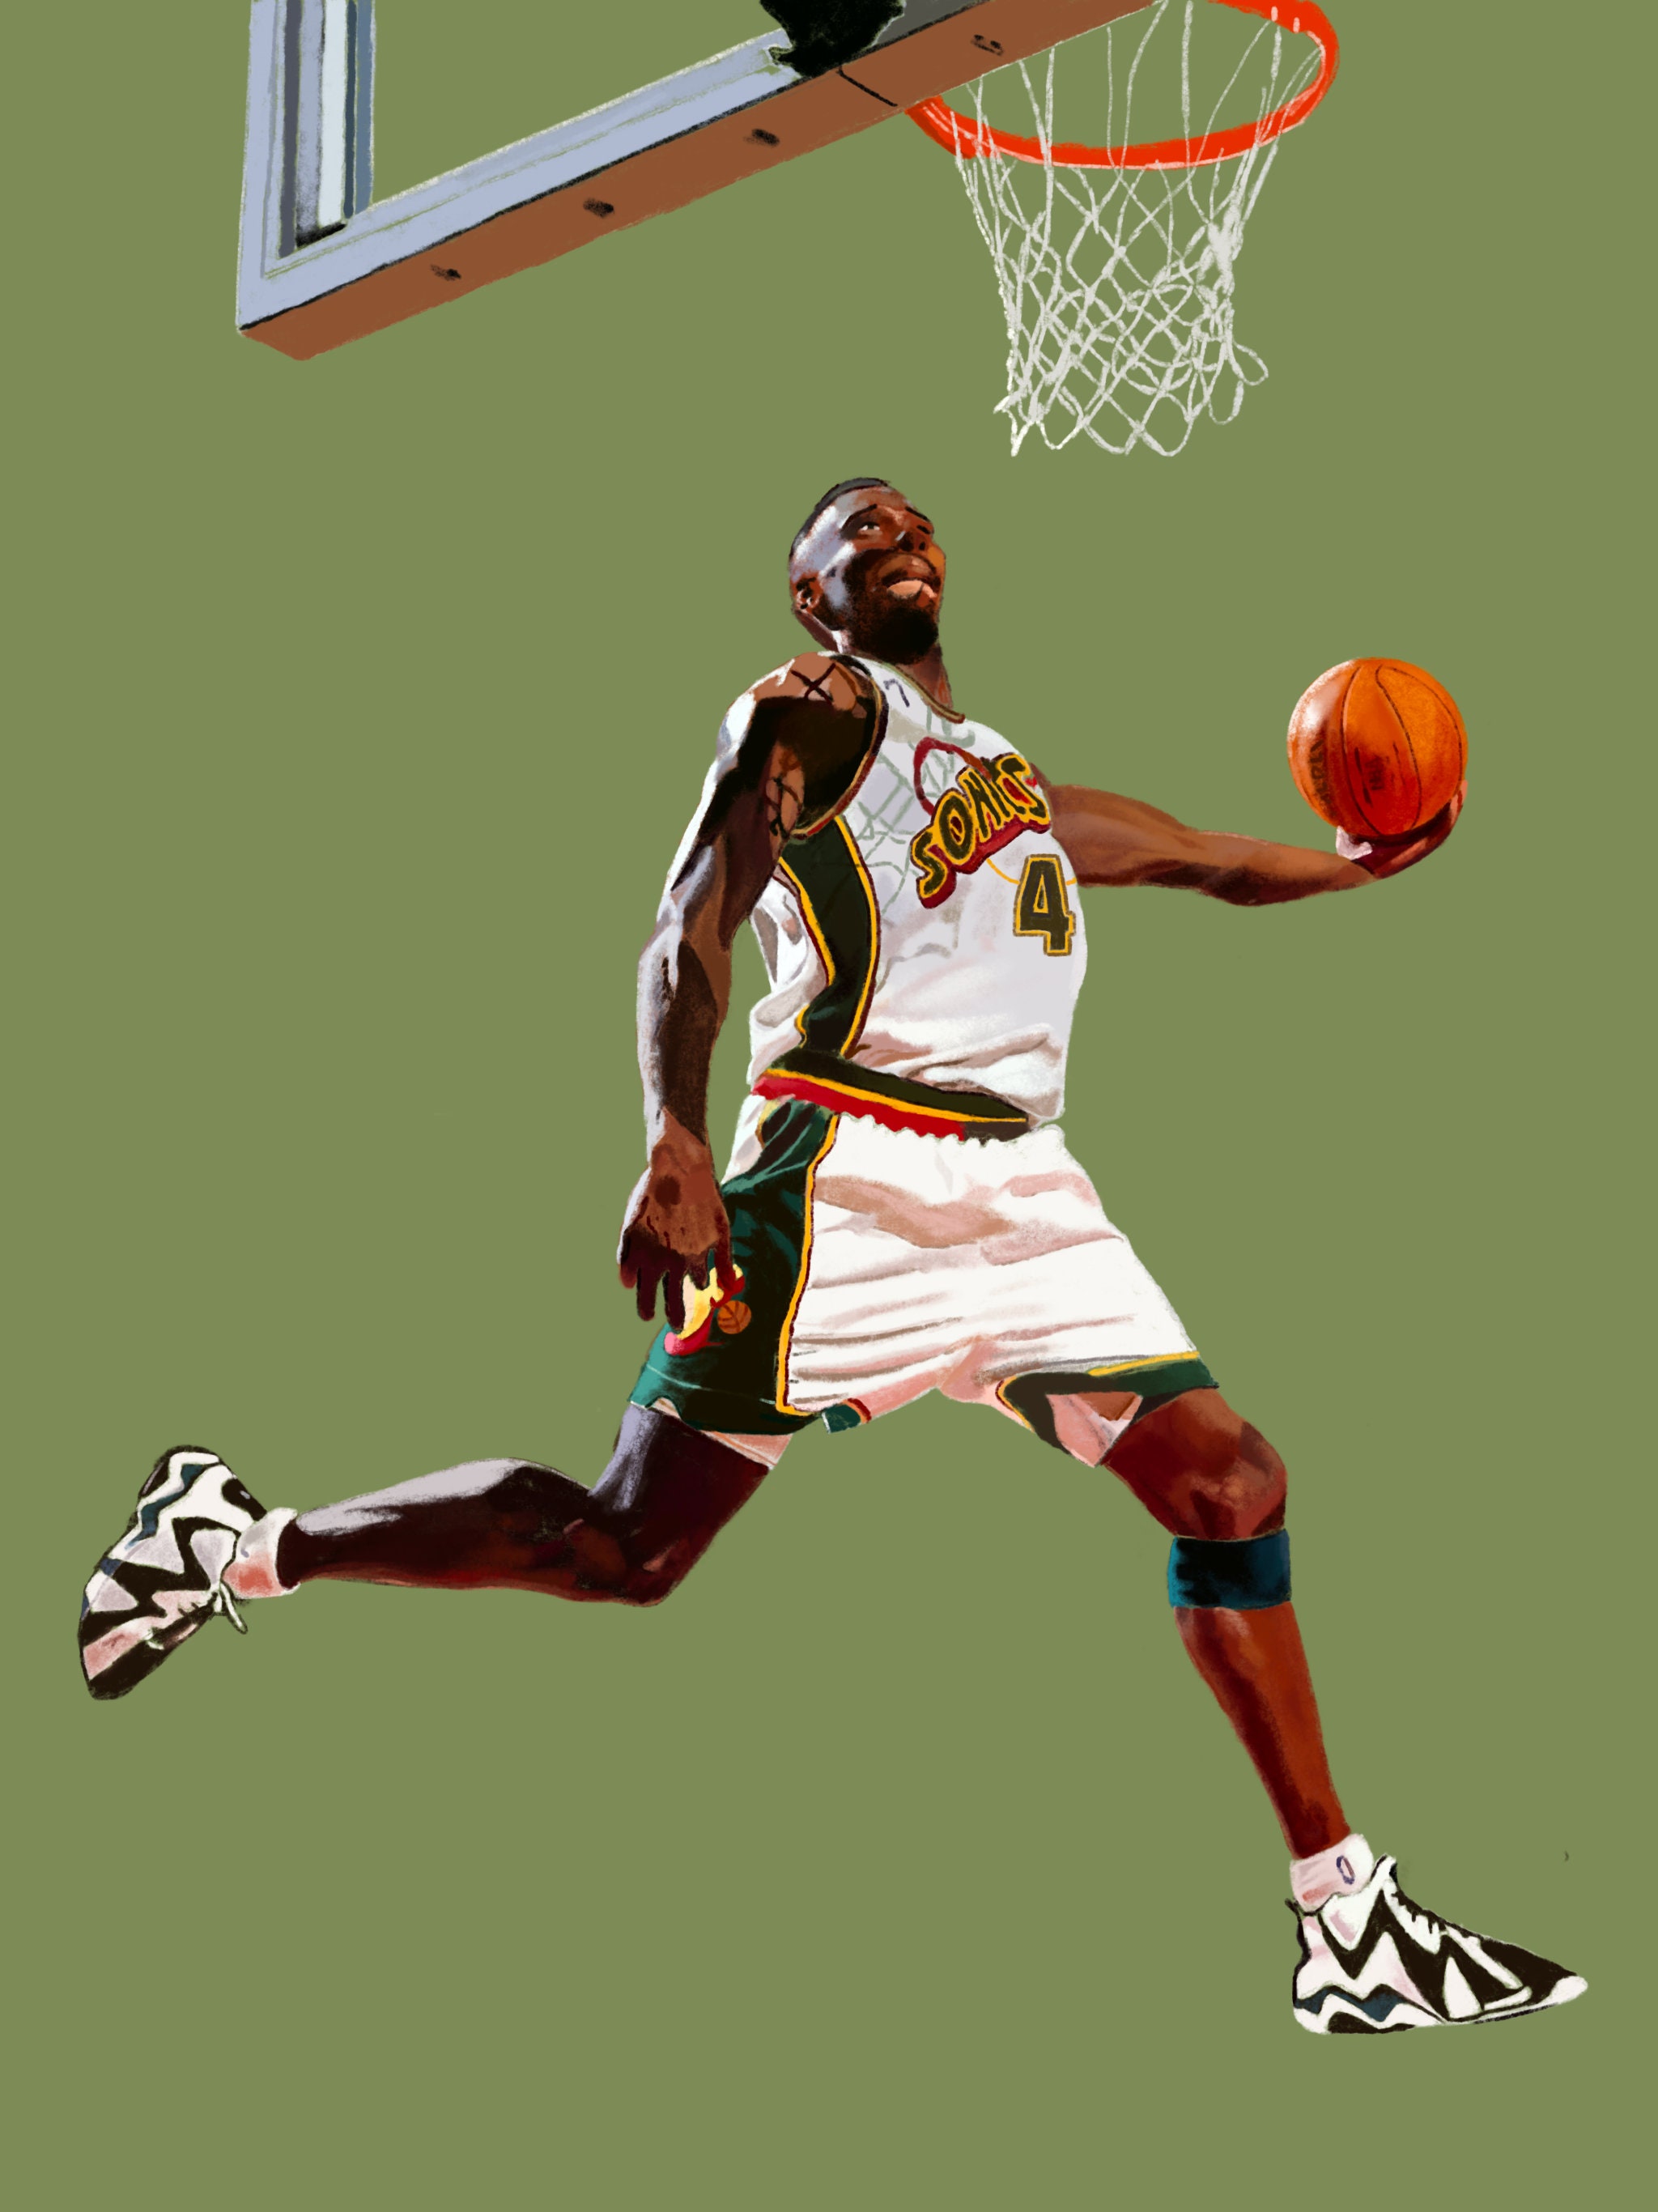 Shawn Kemp Poster for Sale by CamillaDesign